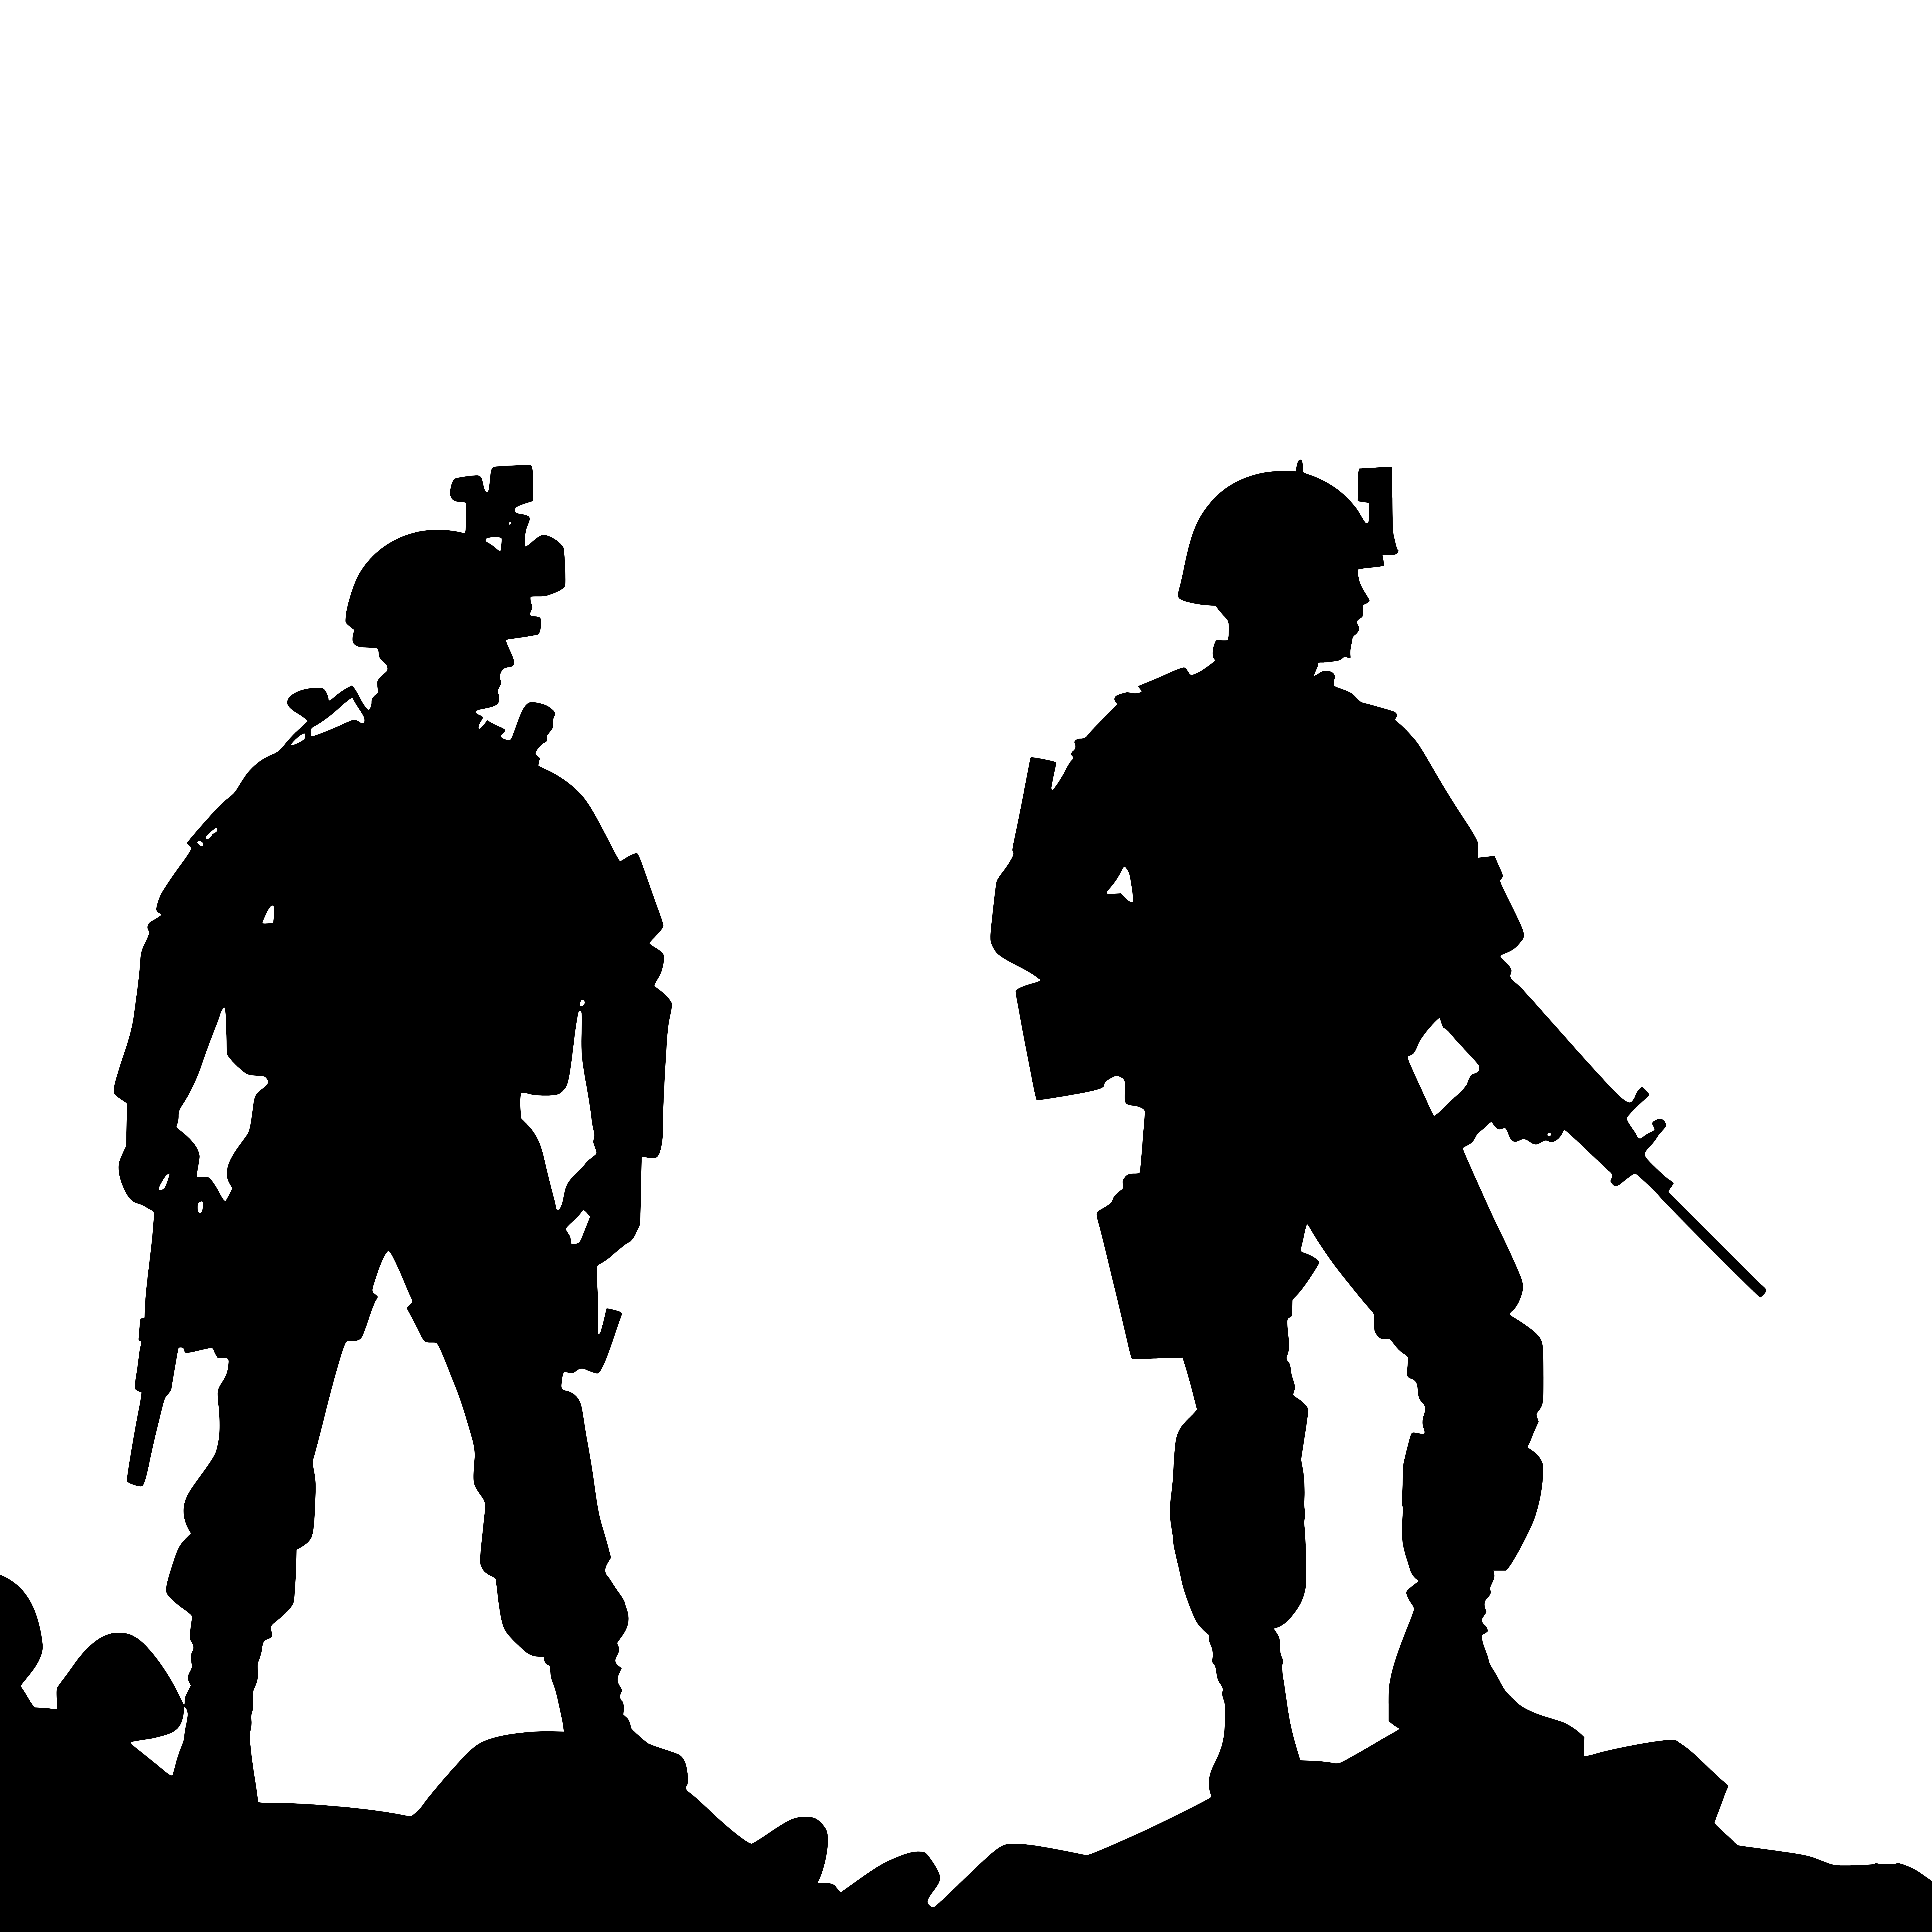 Army soldiers silhouette design